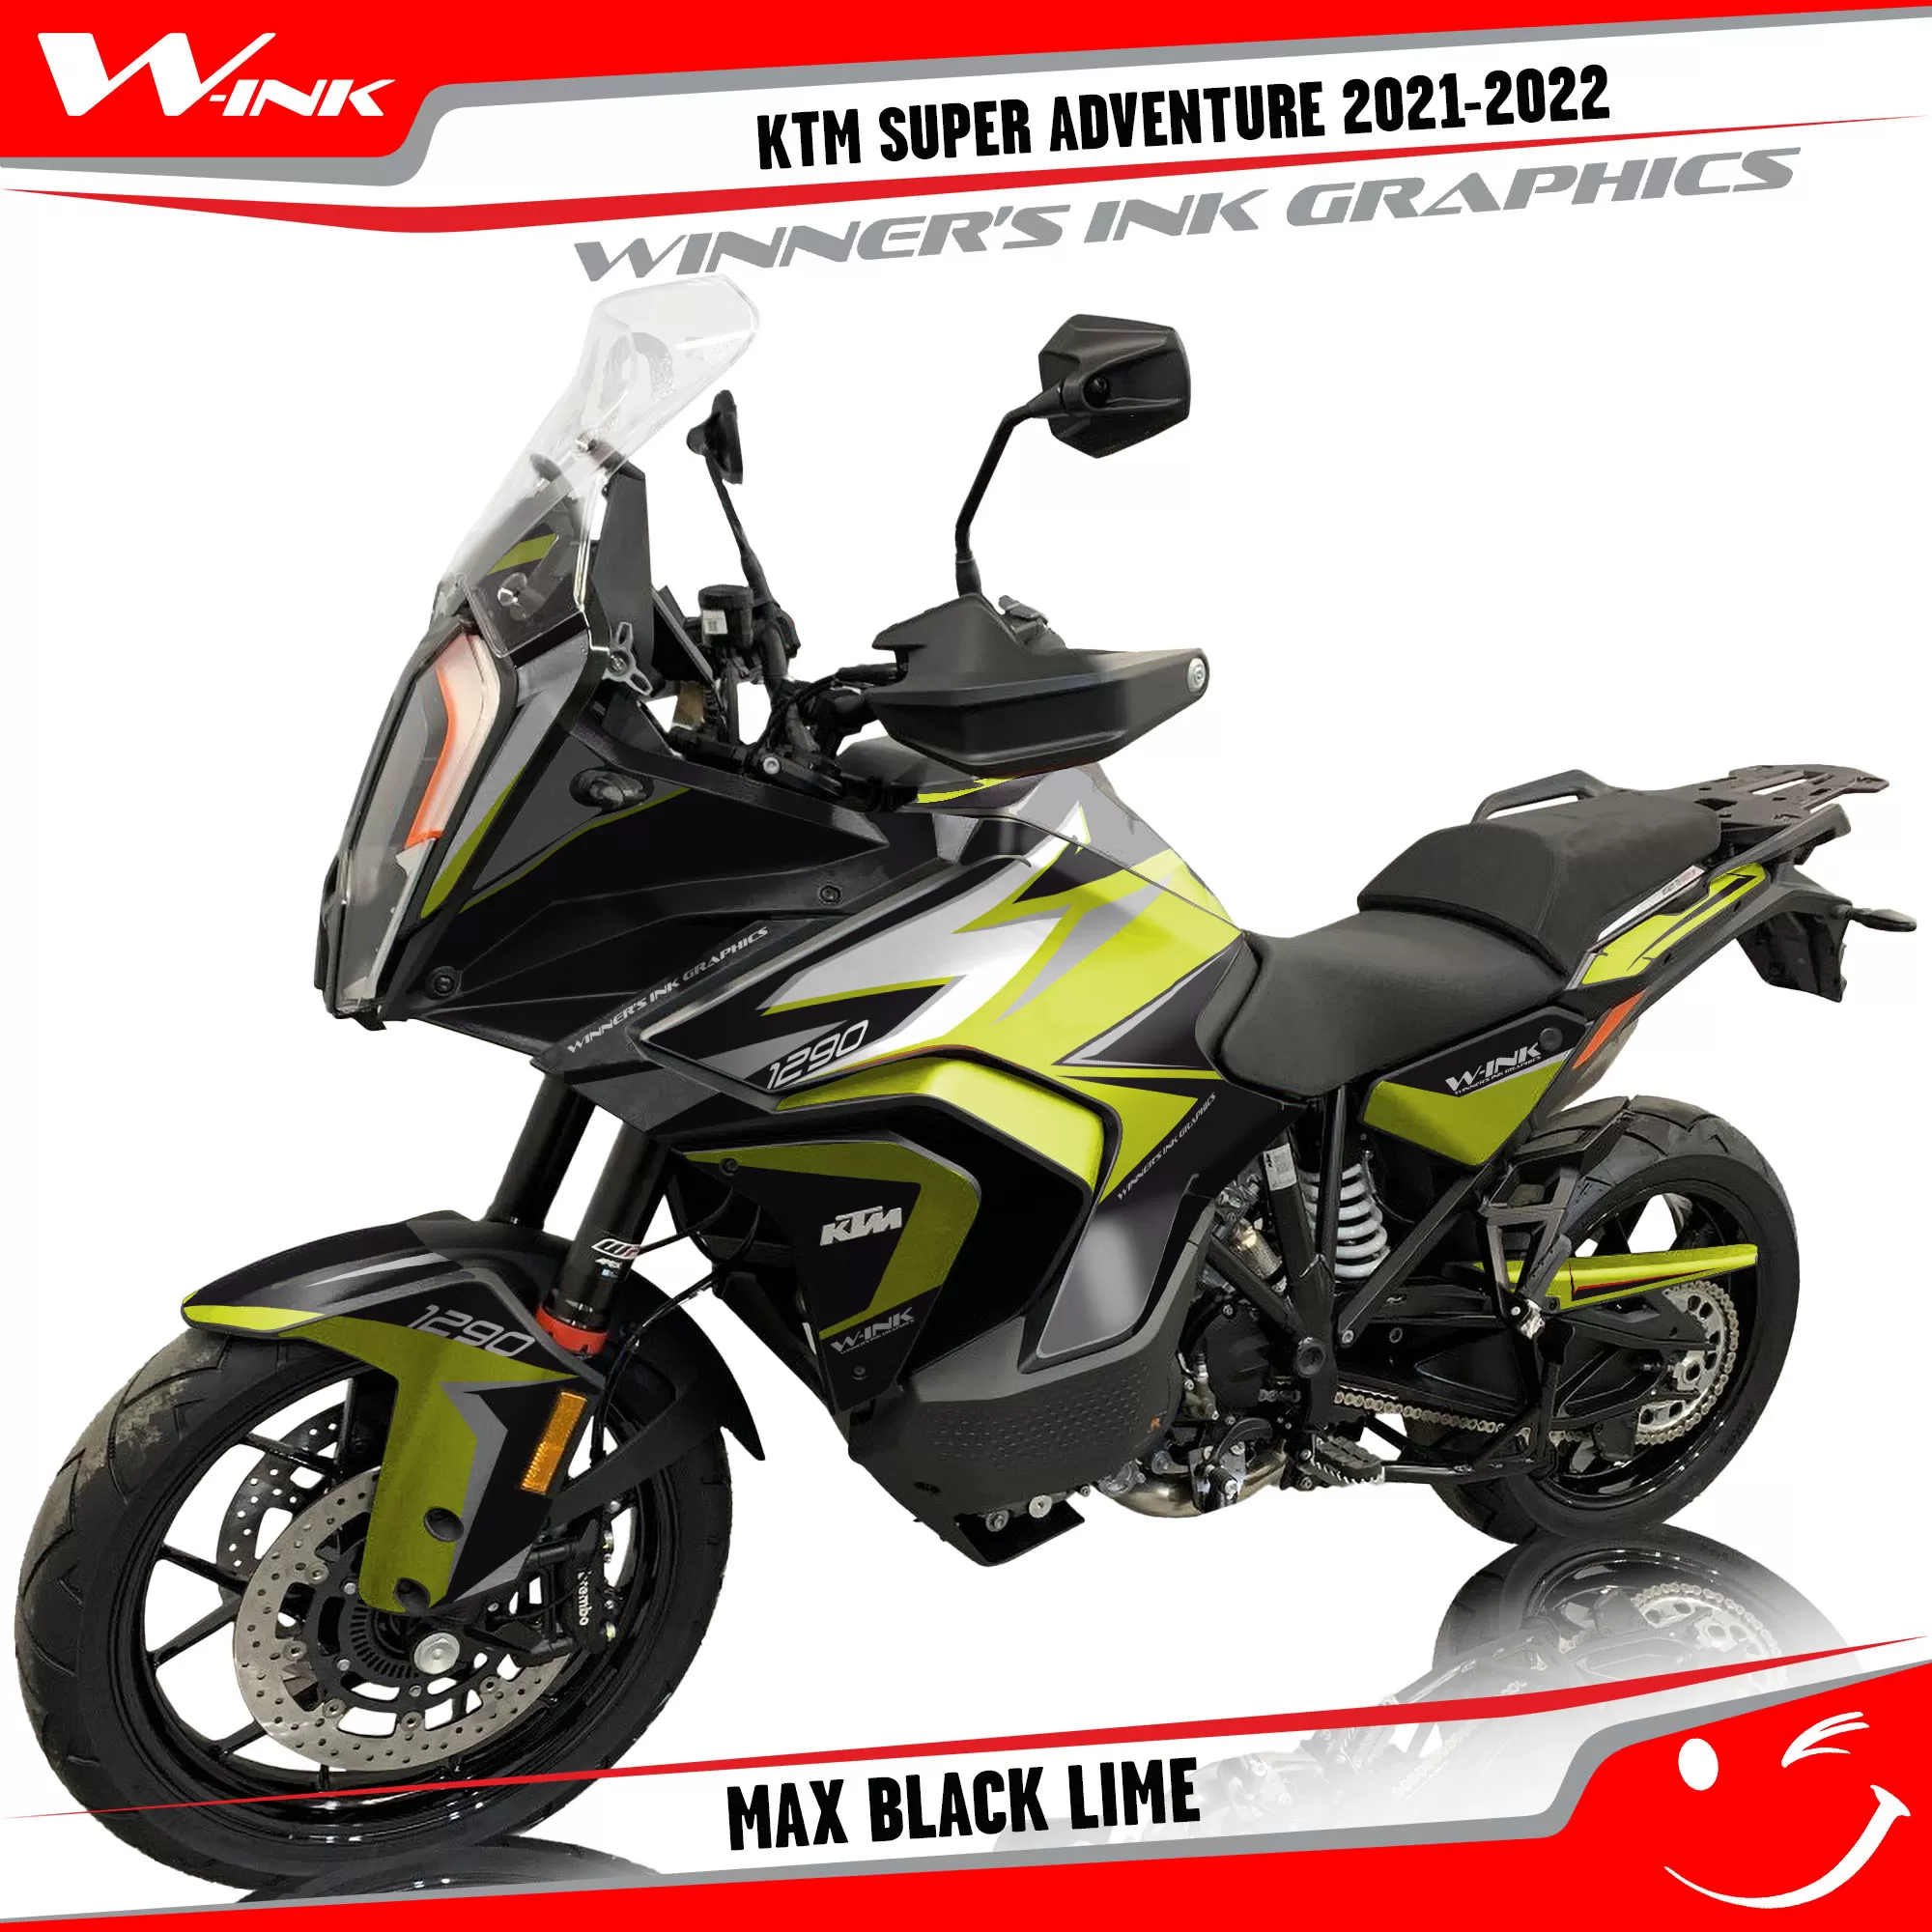 KTM-Super-Adventure-S-2021-2022-graphics-kit-and-decals-with-designs-Max-Black-Lime